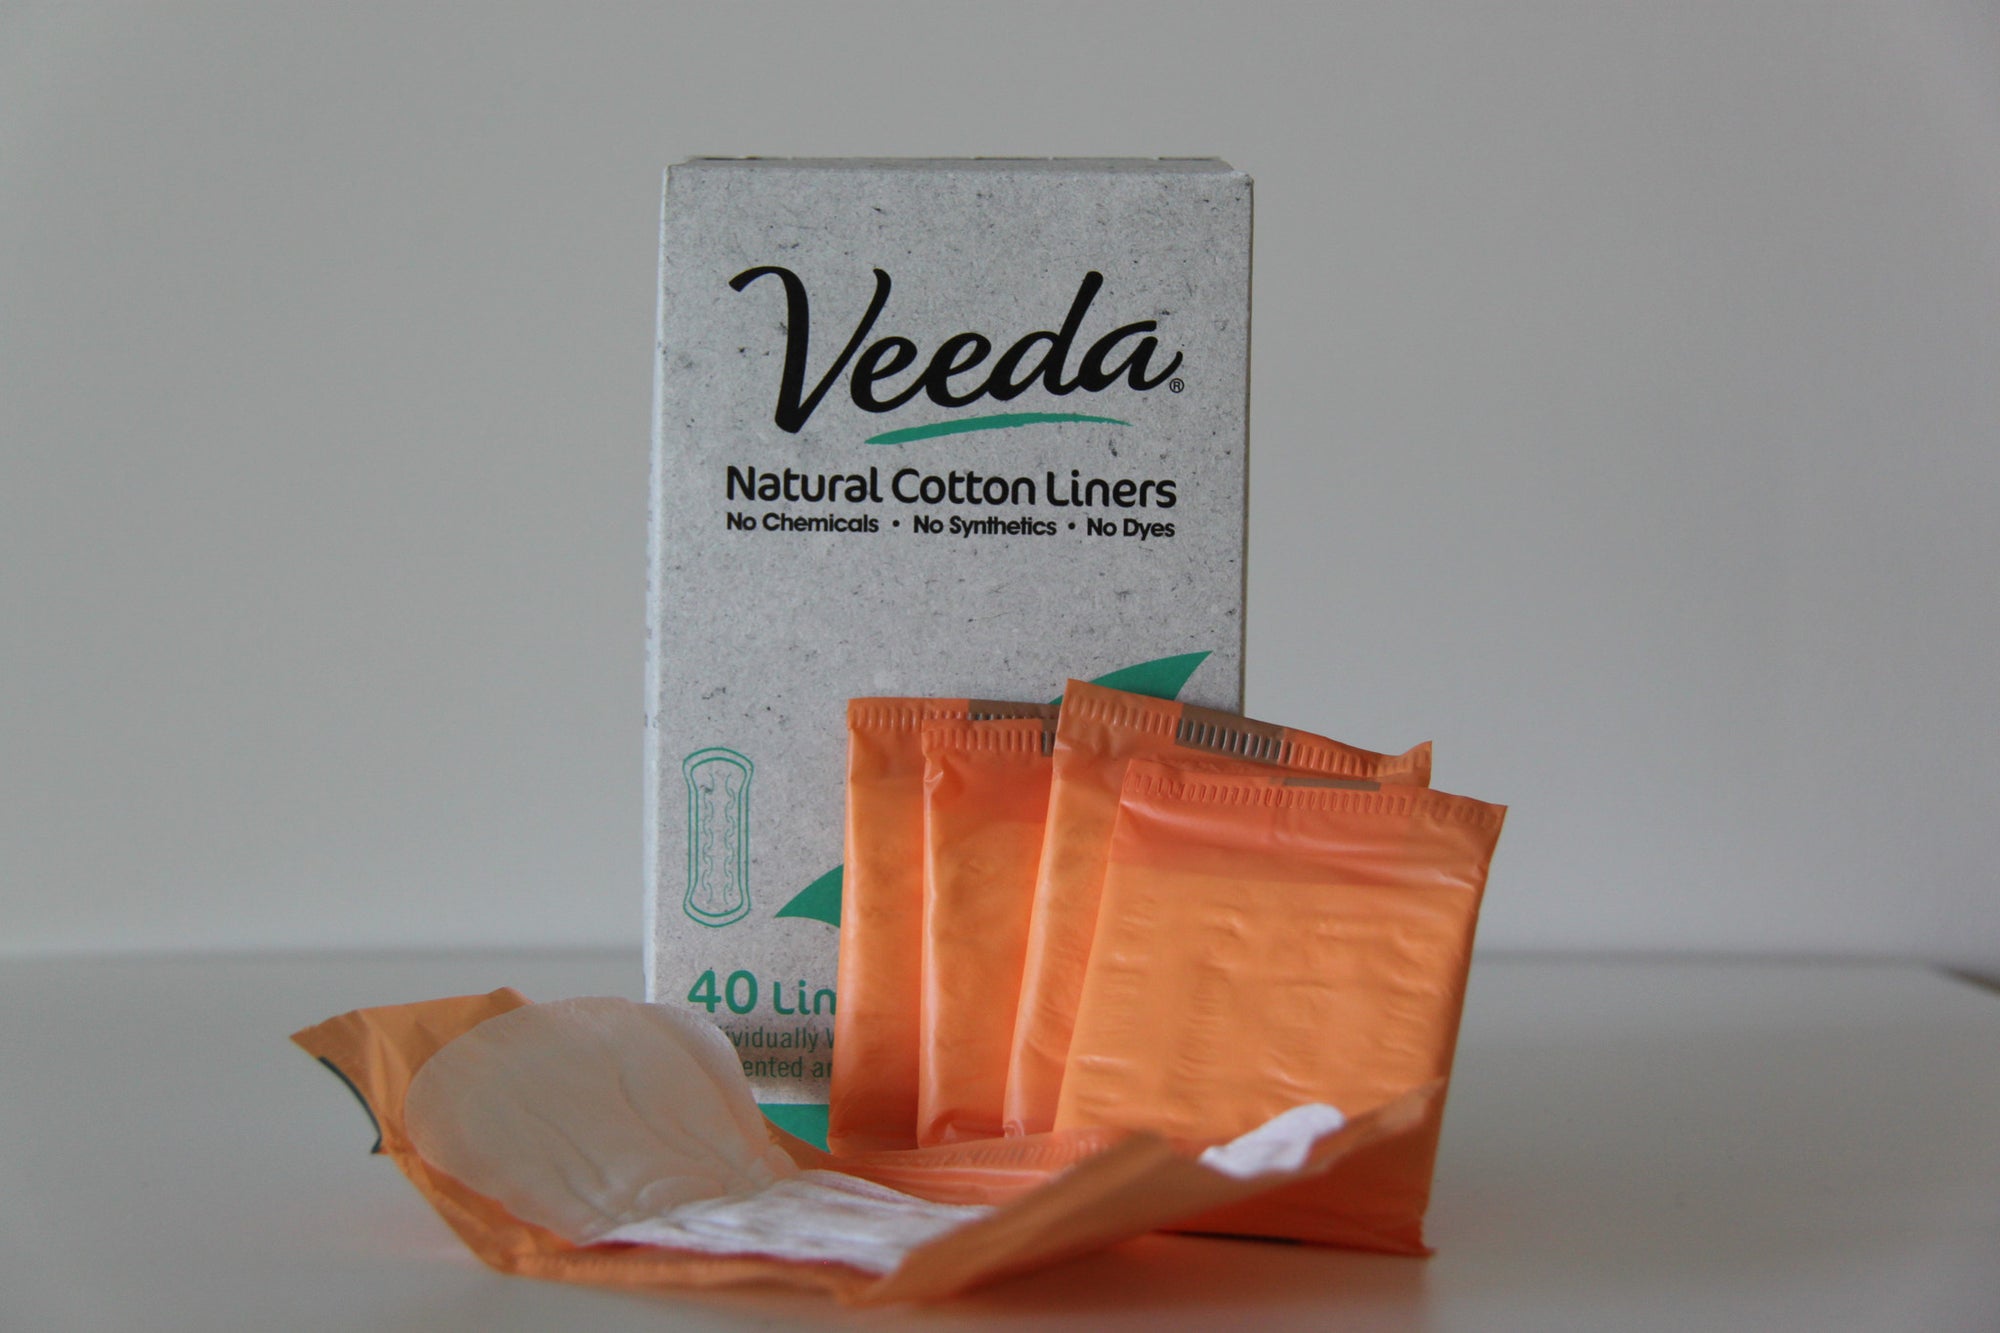 Affordable, natural and healthy Veeda products